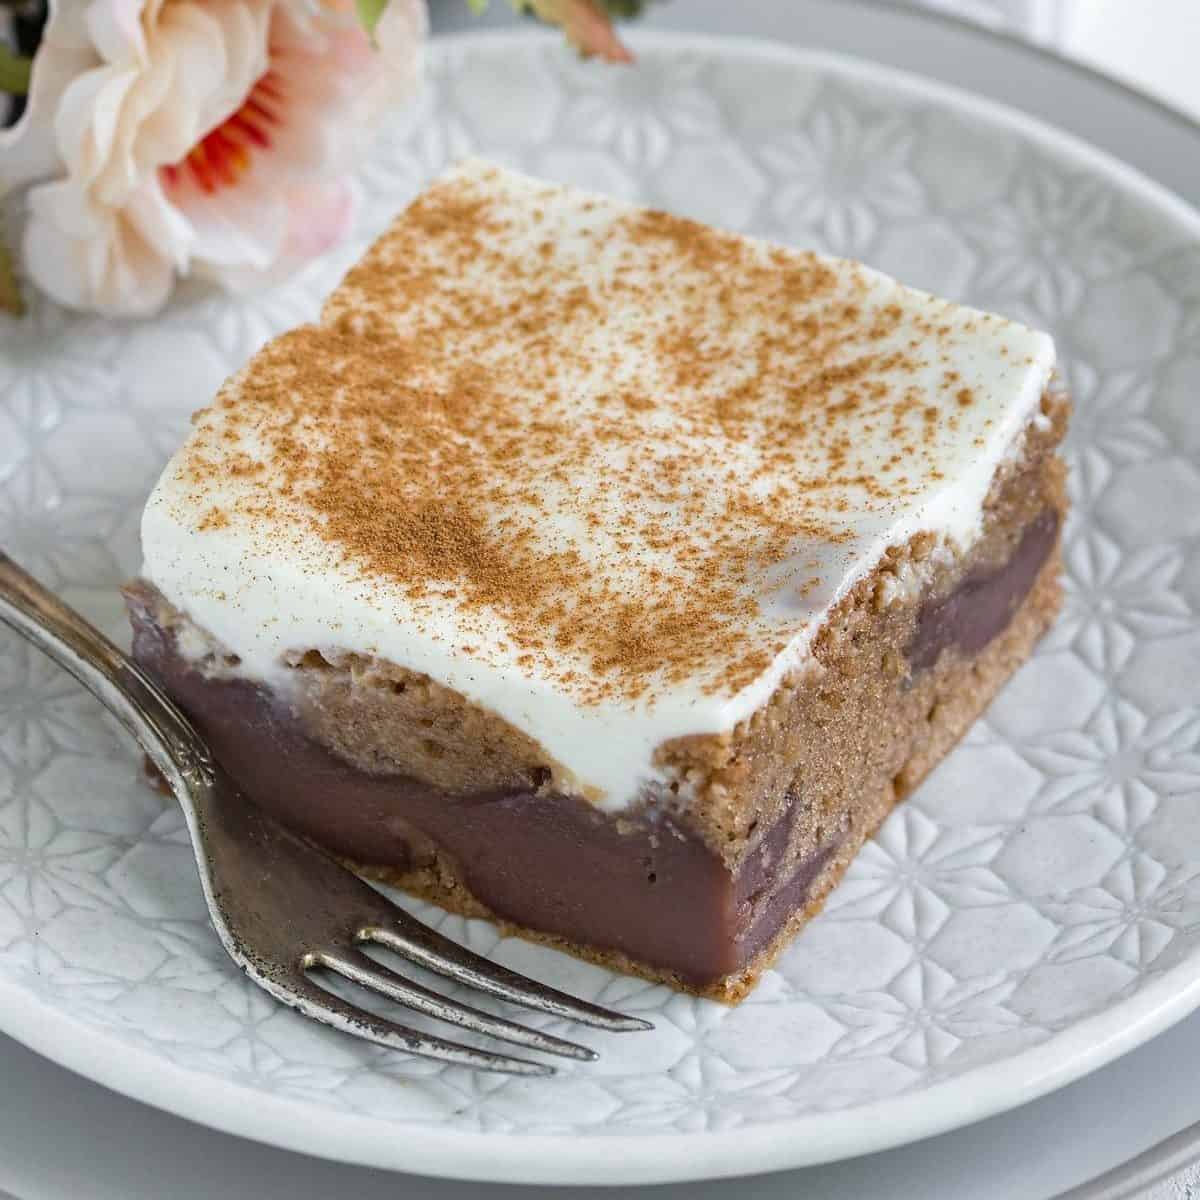 Chocolate coffee cake with sour cream topping.